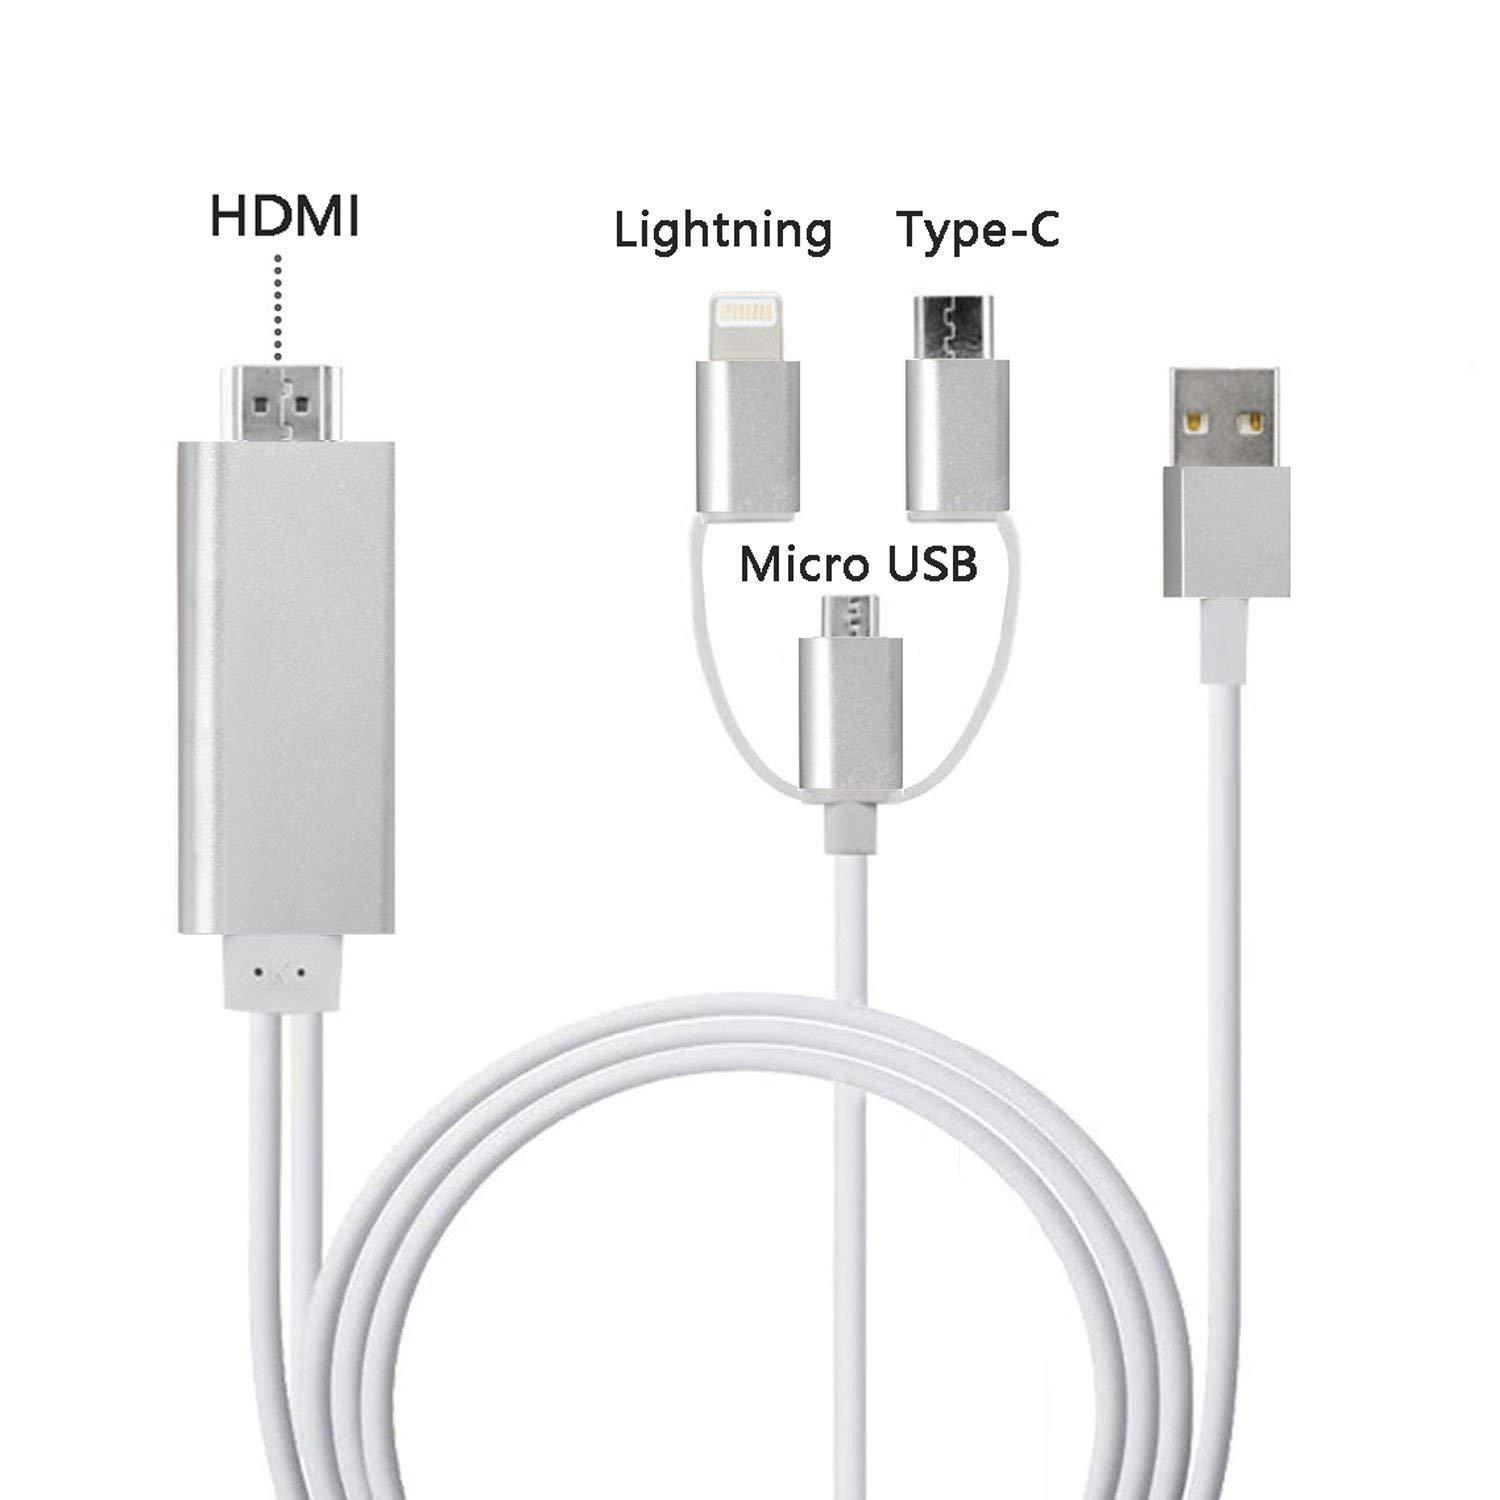 HDMI Adapter for iphone, 3 in 1 Lighting/Micro USB/Type-C to HDMI Cabl –  SEGMART